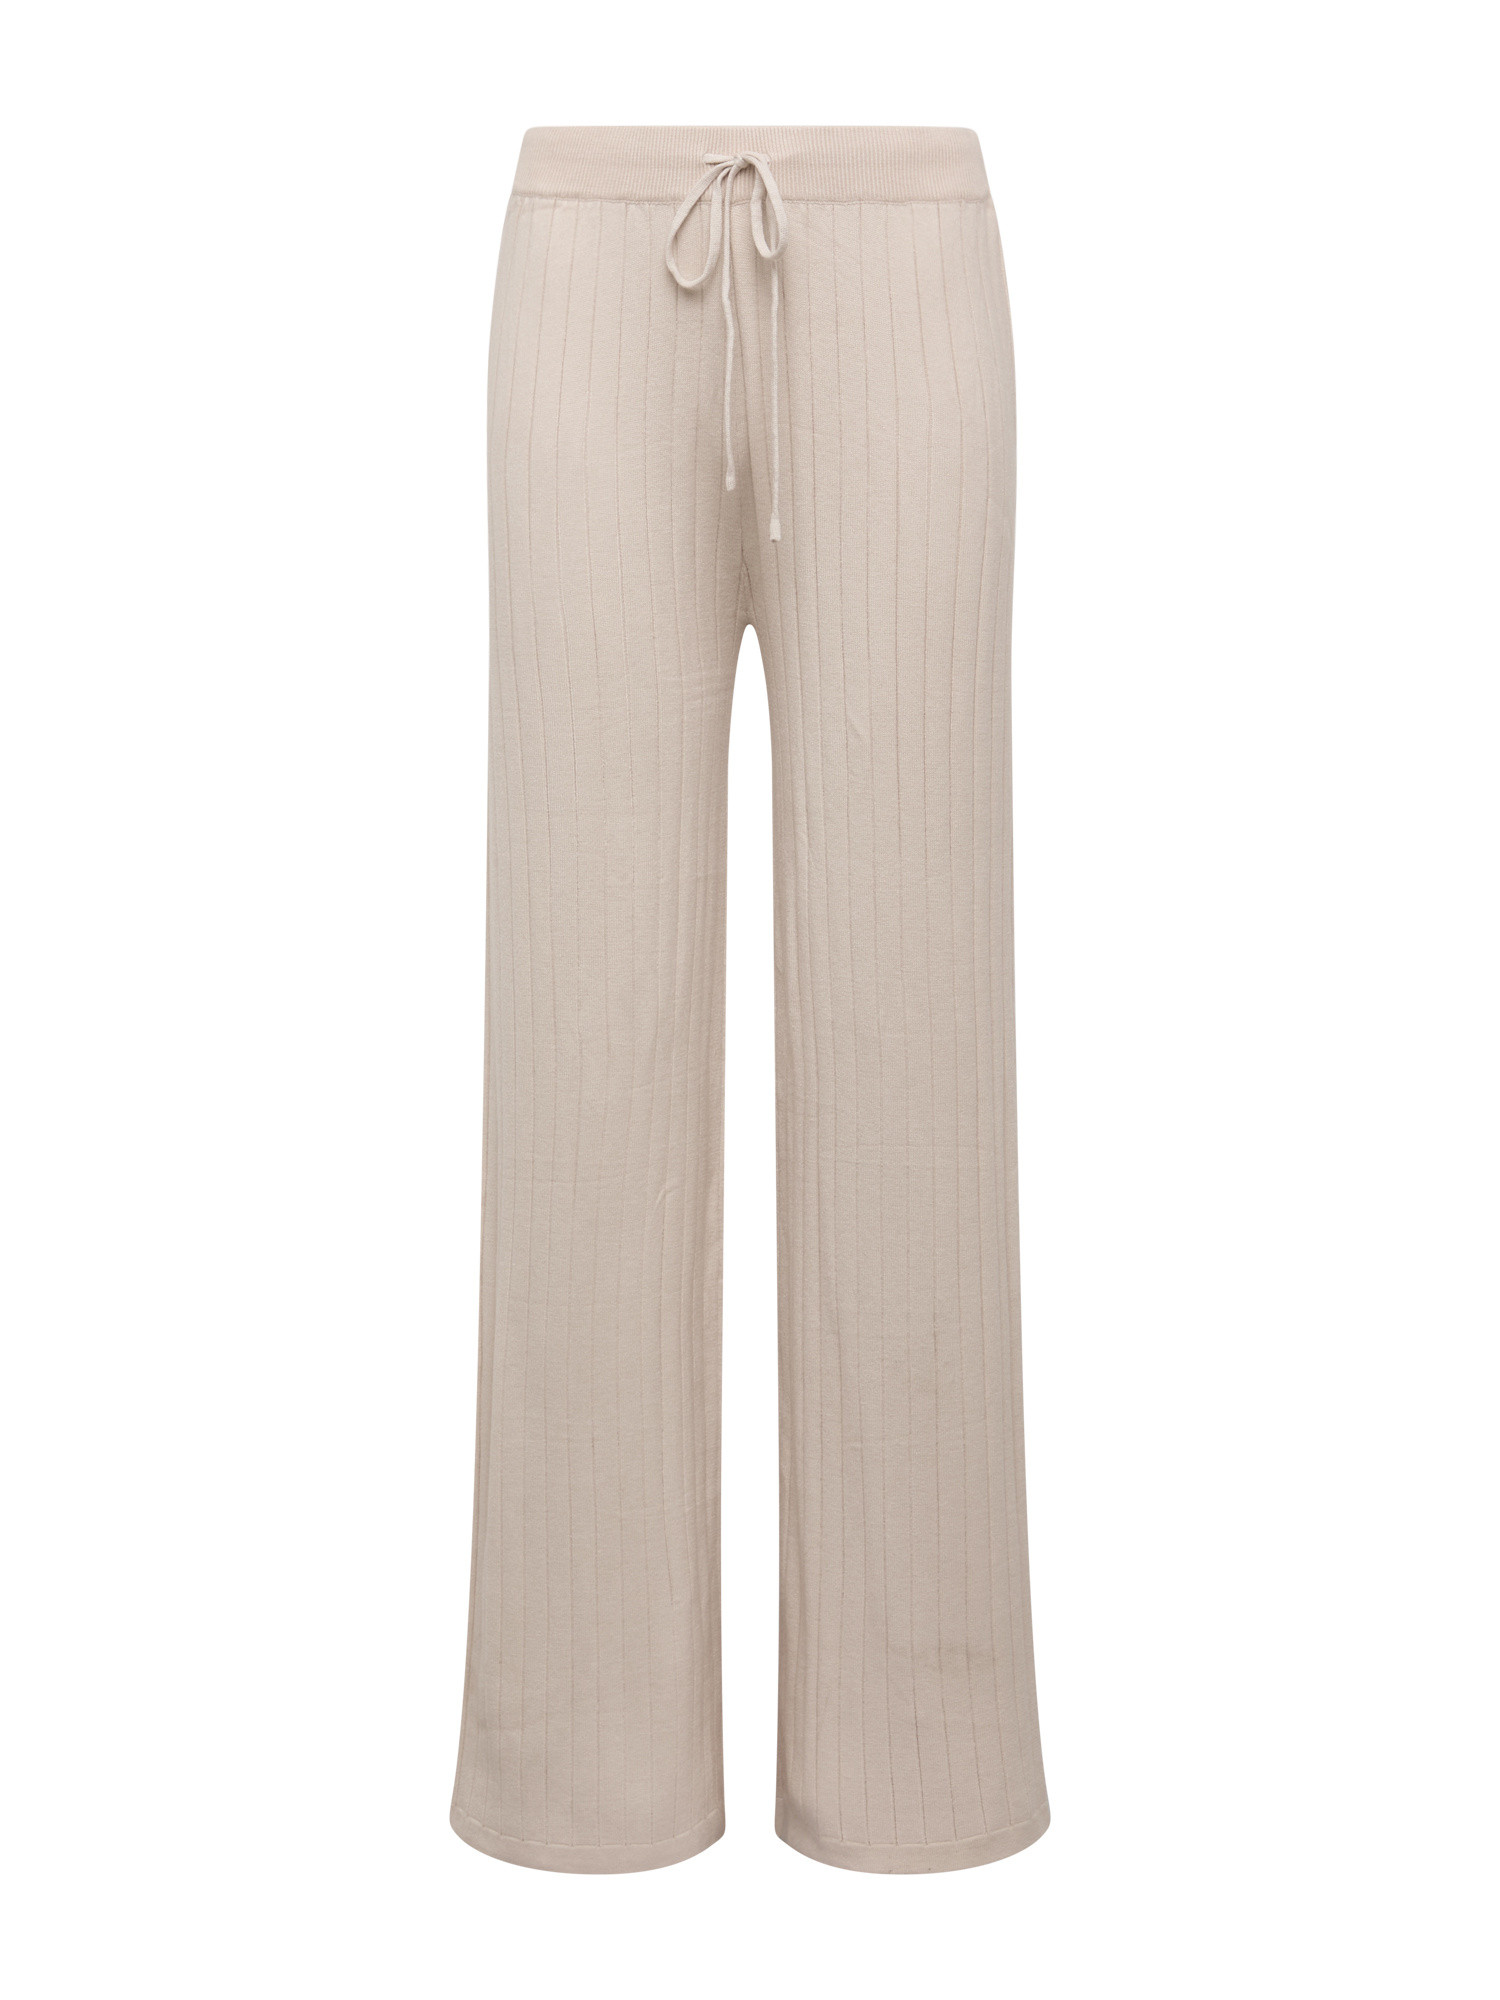 Koan - Ribbed knit trousers, Beige, large image number 0